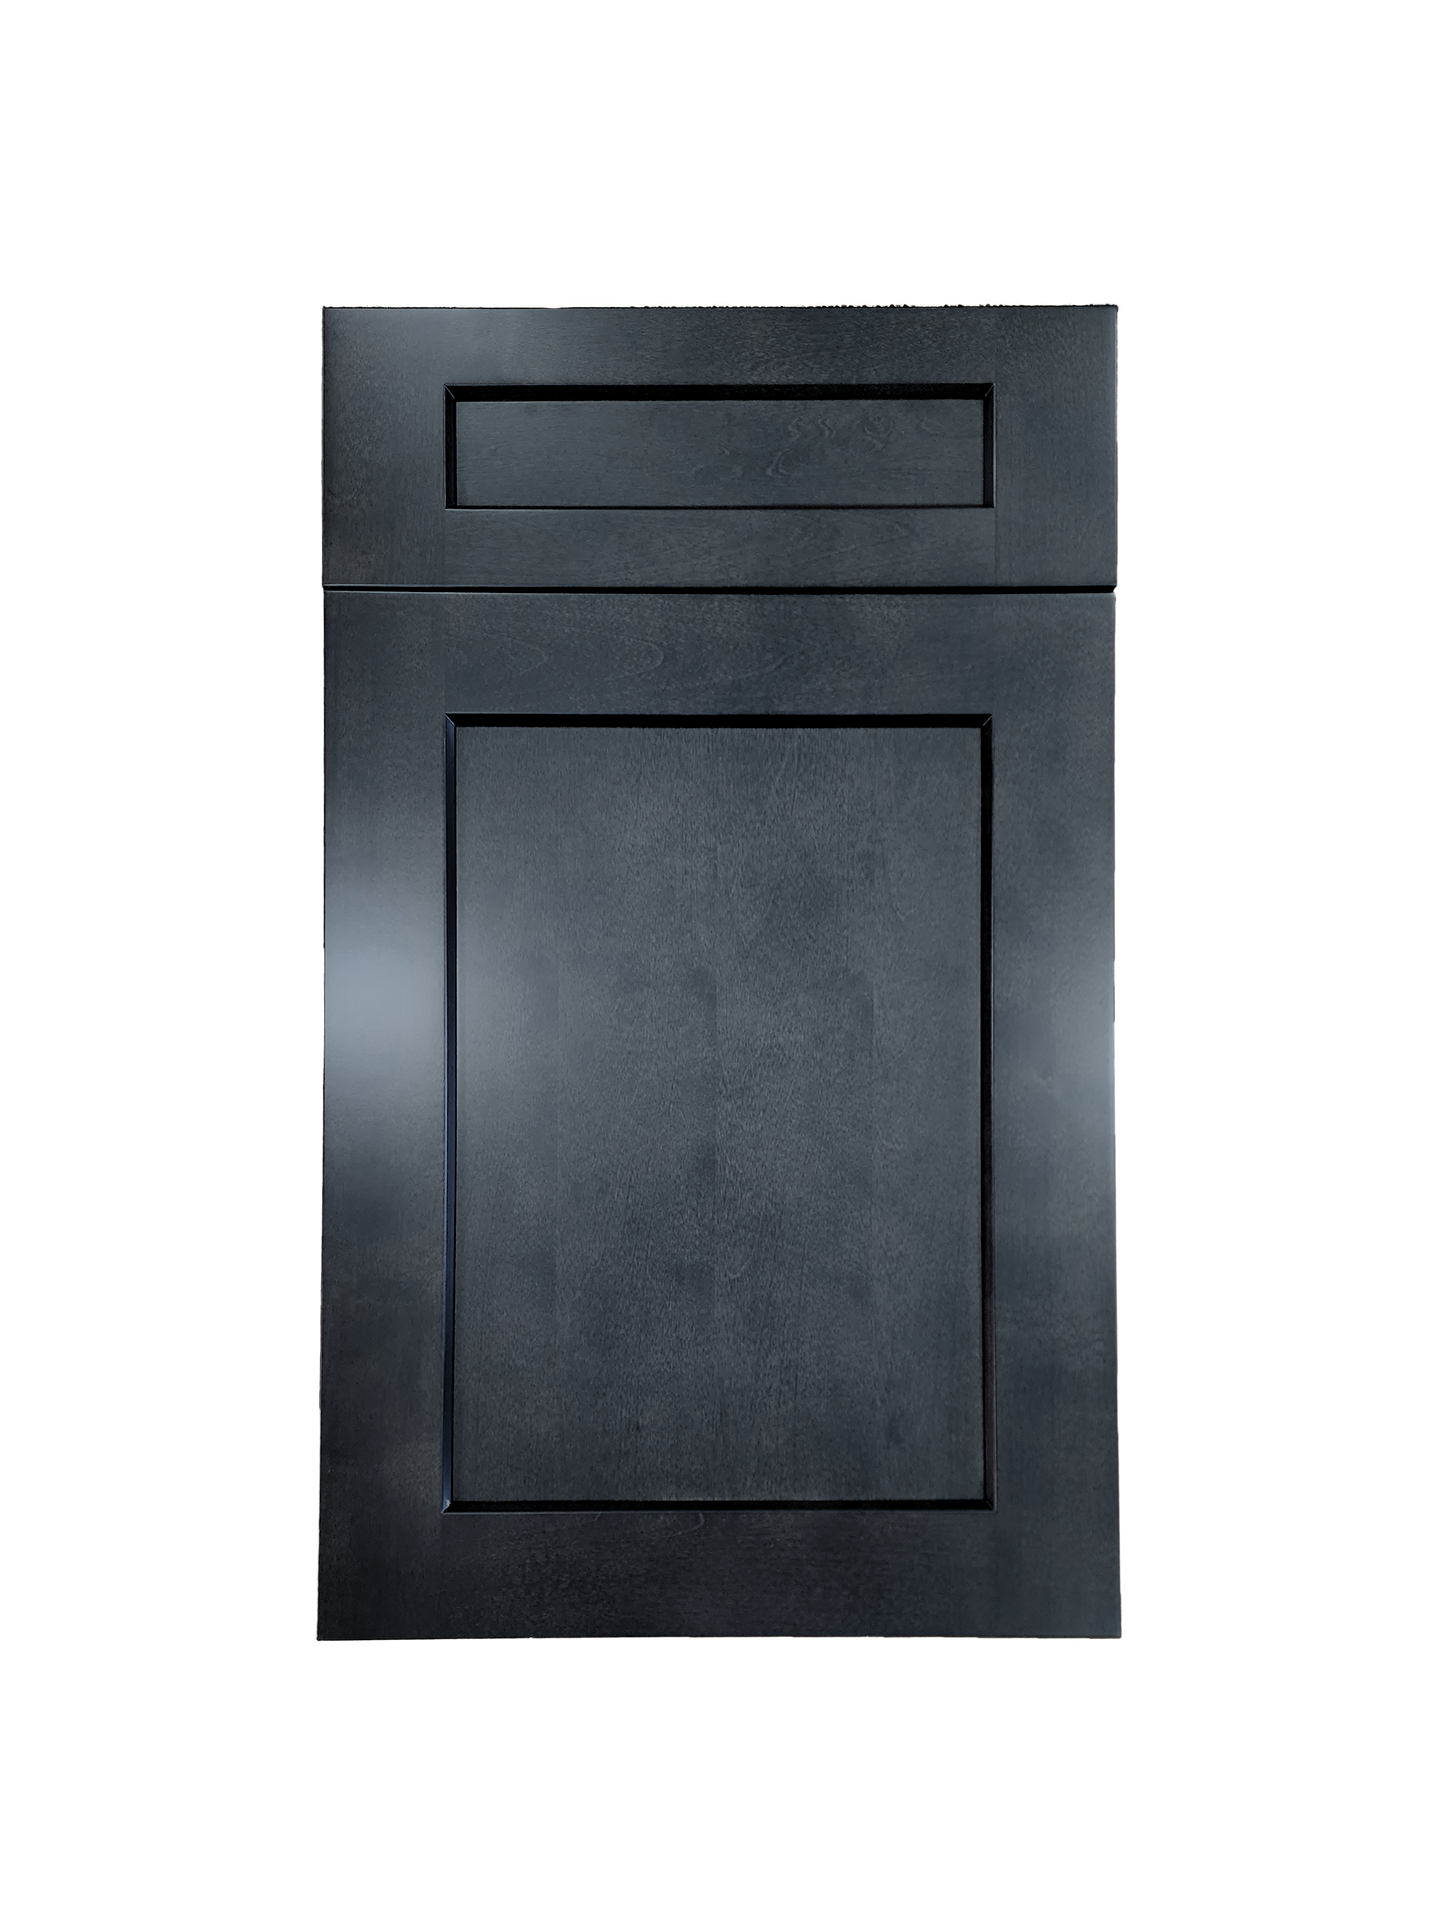 Stormy Grey Wall Refrigerator Cabinet 33 inches wide 24 inches deep 15 inches tall with Stormy Grey box and Stormy Grey doors